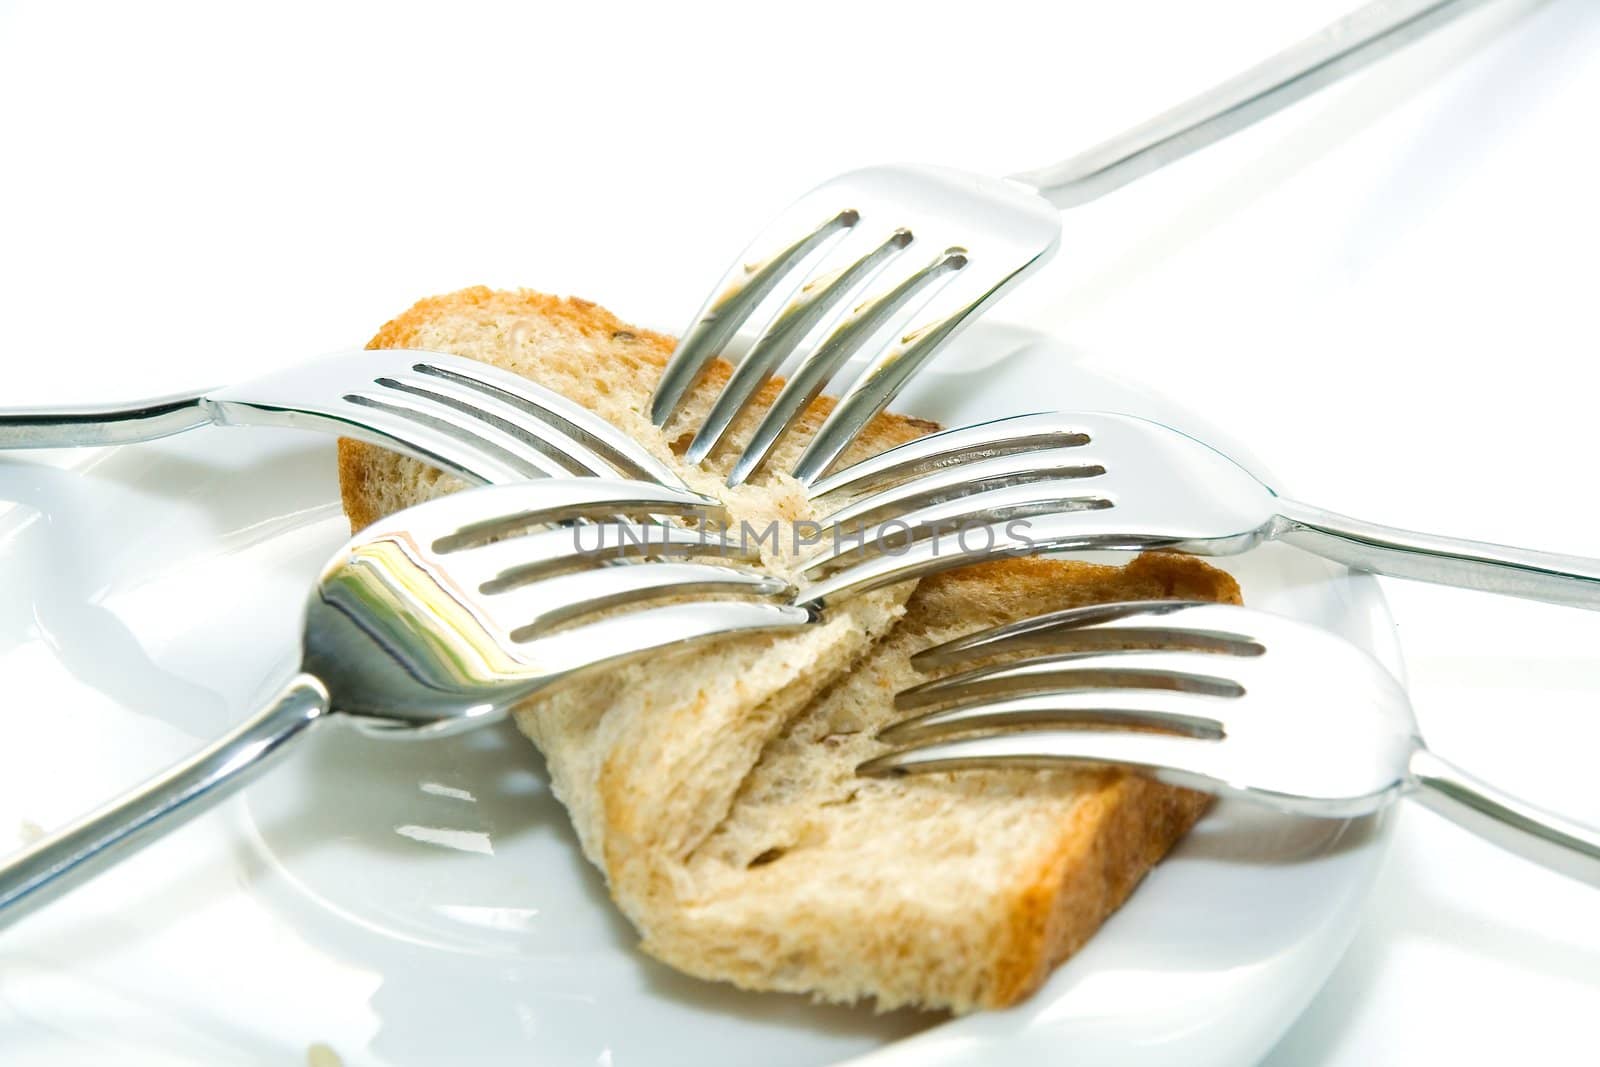 Some forks, white plateau and bread slice on a white background.  The concept of limitation of resources.
The concept  sharing between consumers
